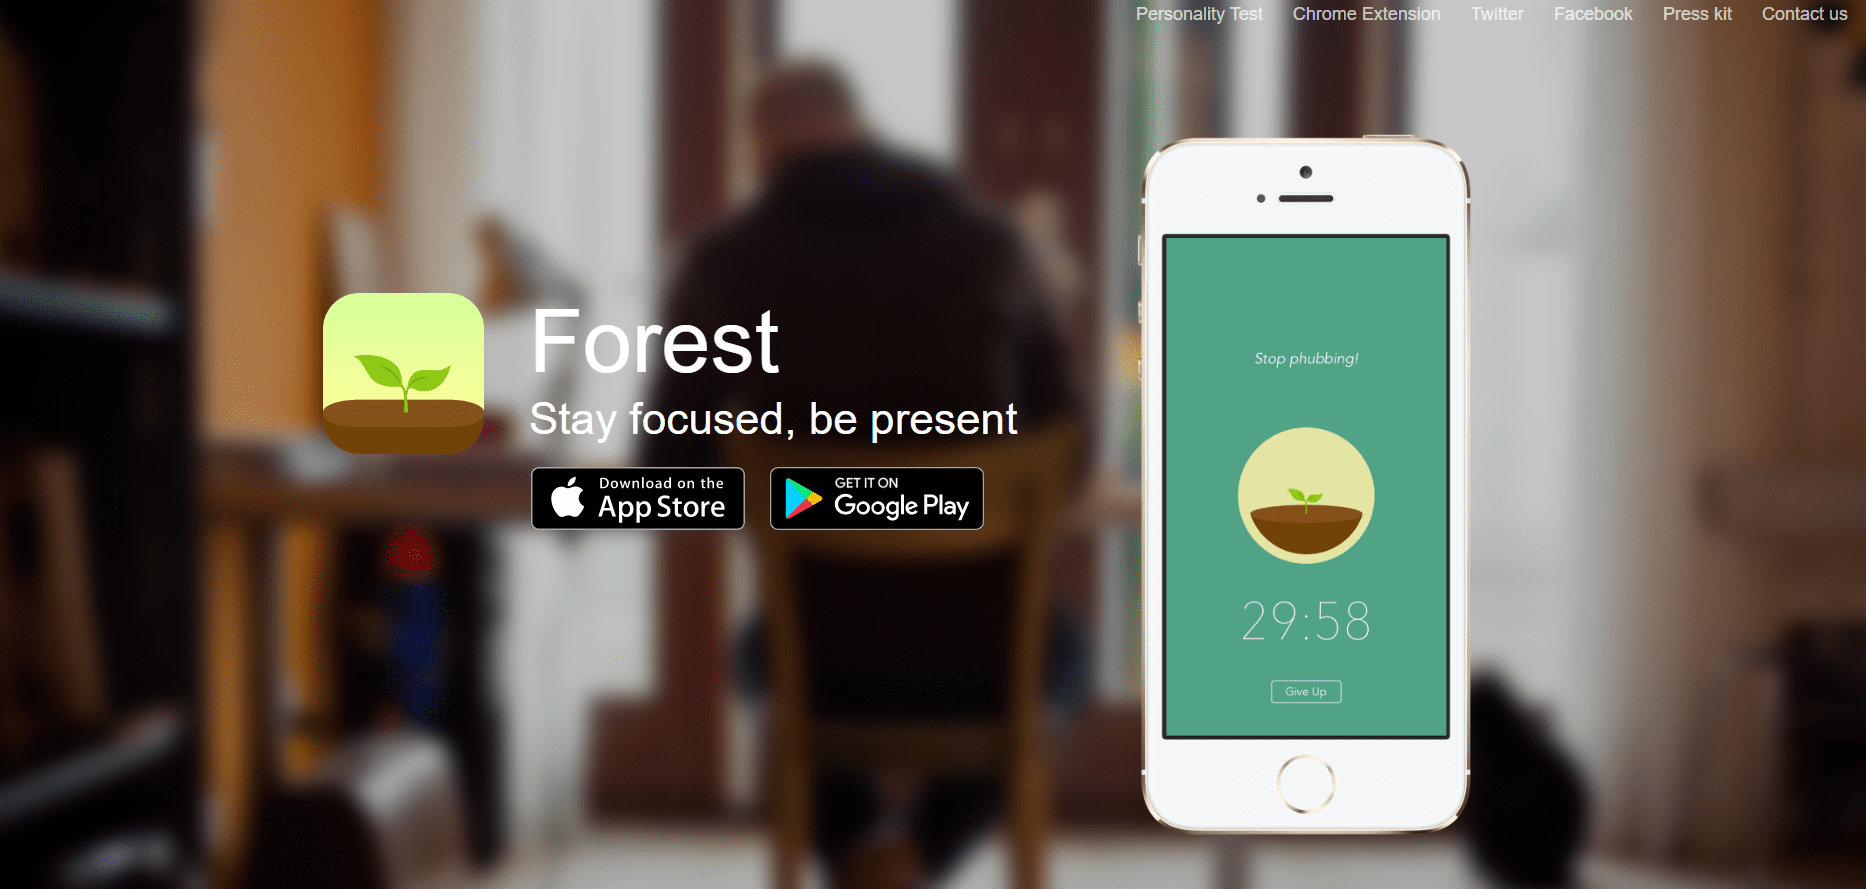 Homepage of Forest, with tagline stay focused, be present, along with it's mobile app and links to Google Play and App Store